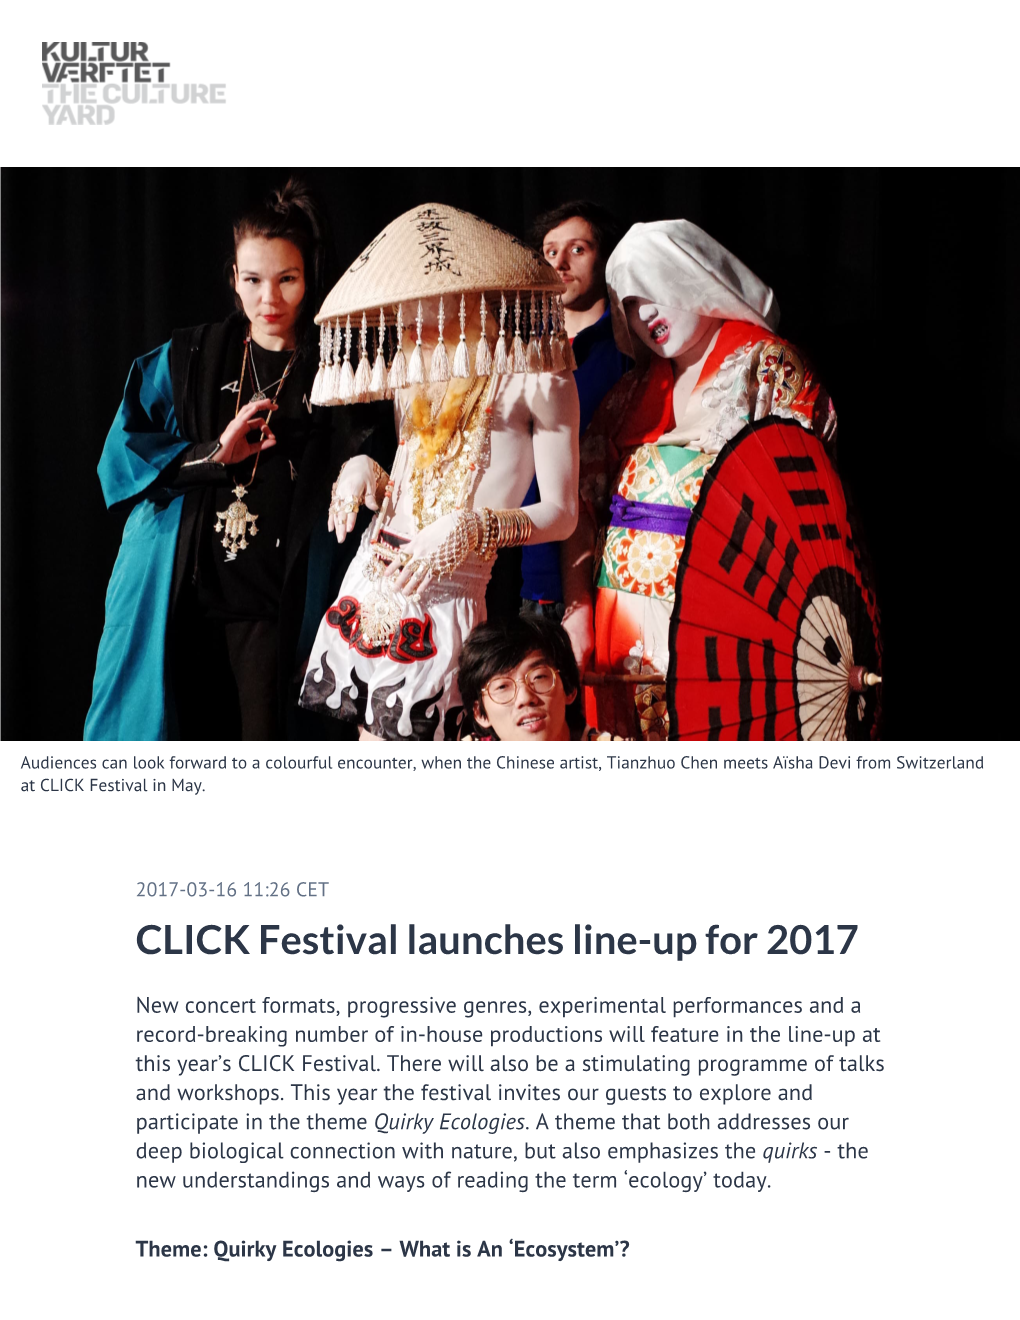 CLICK Festival Launches Line-Up for 2017